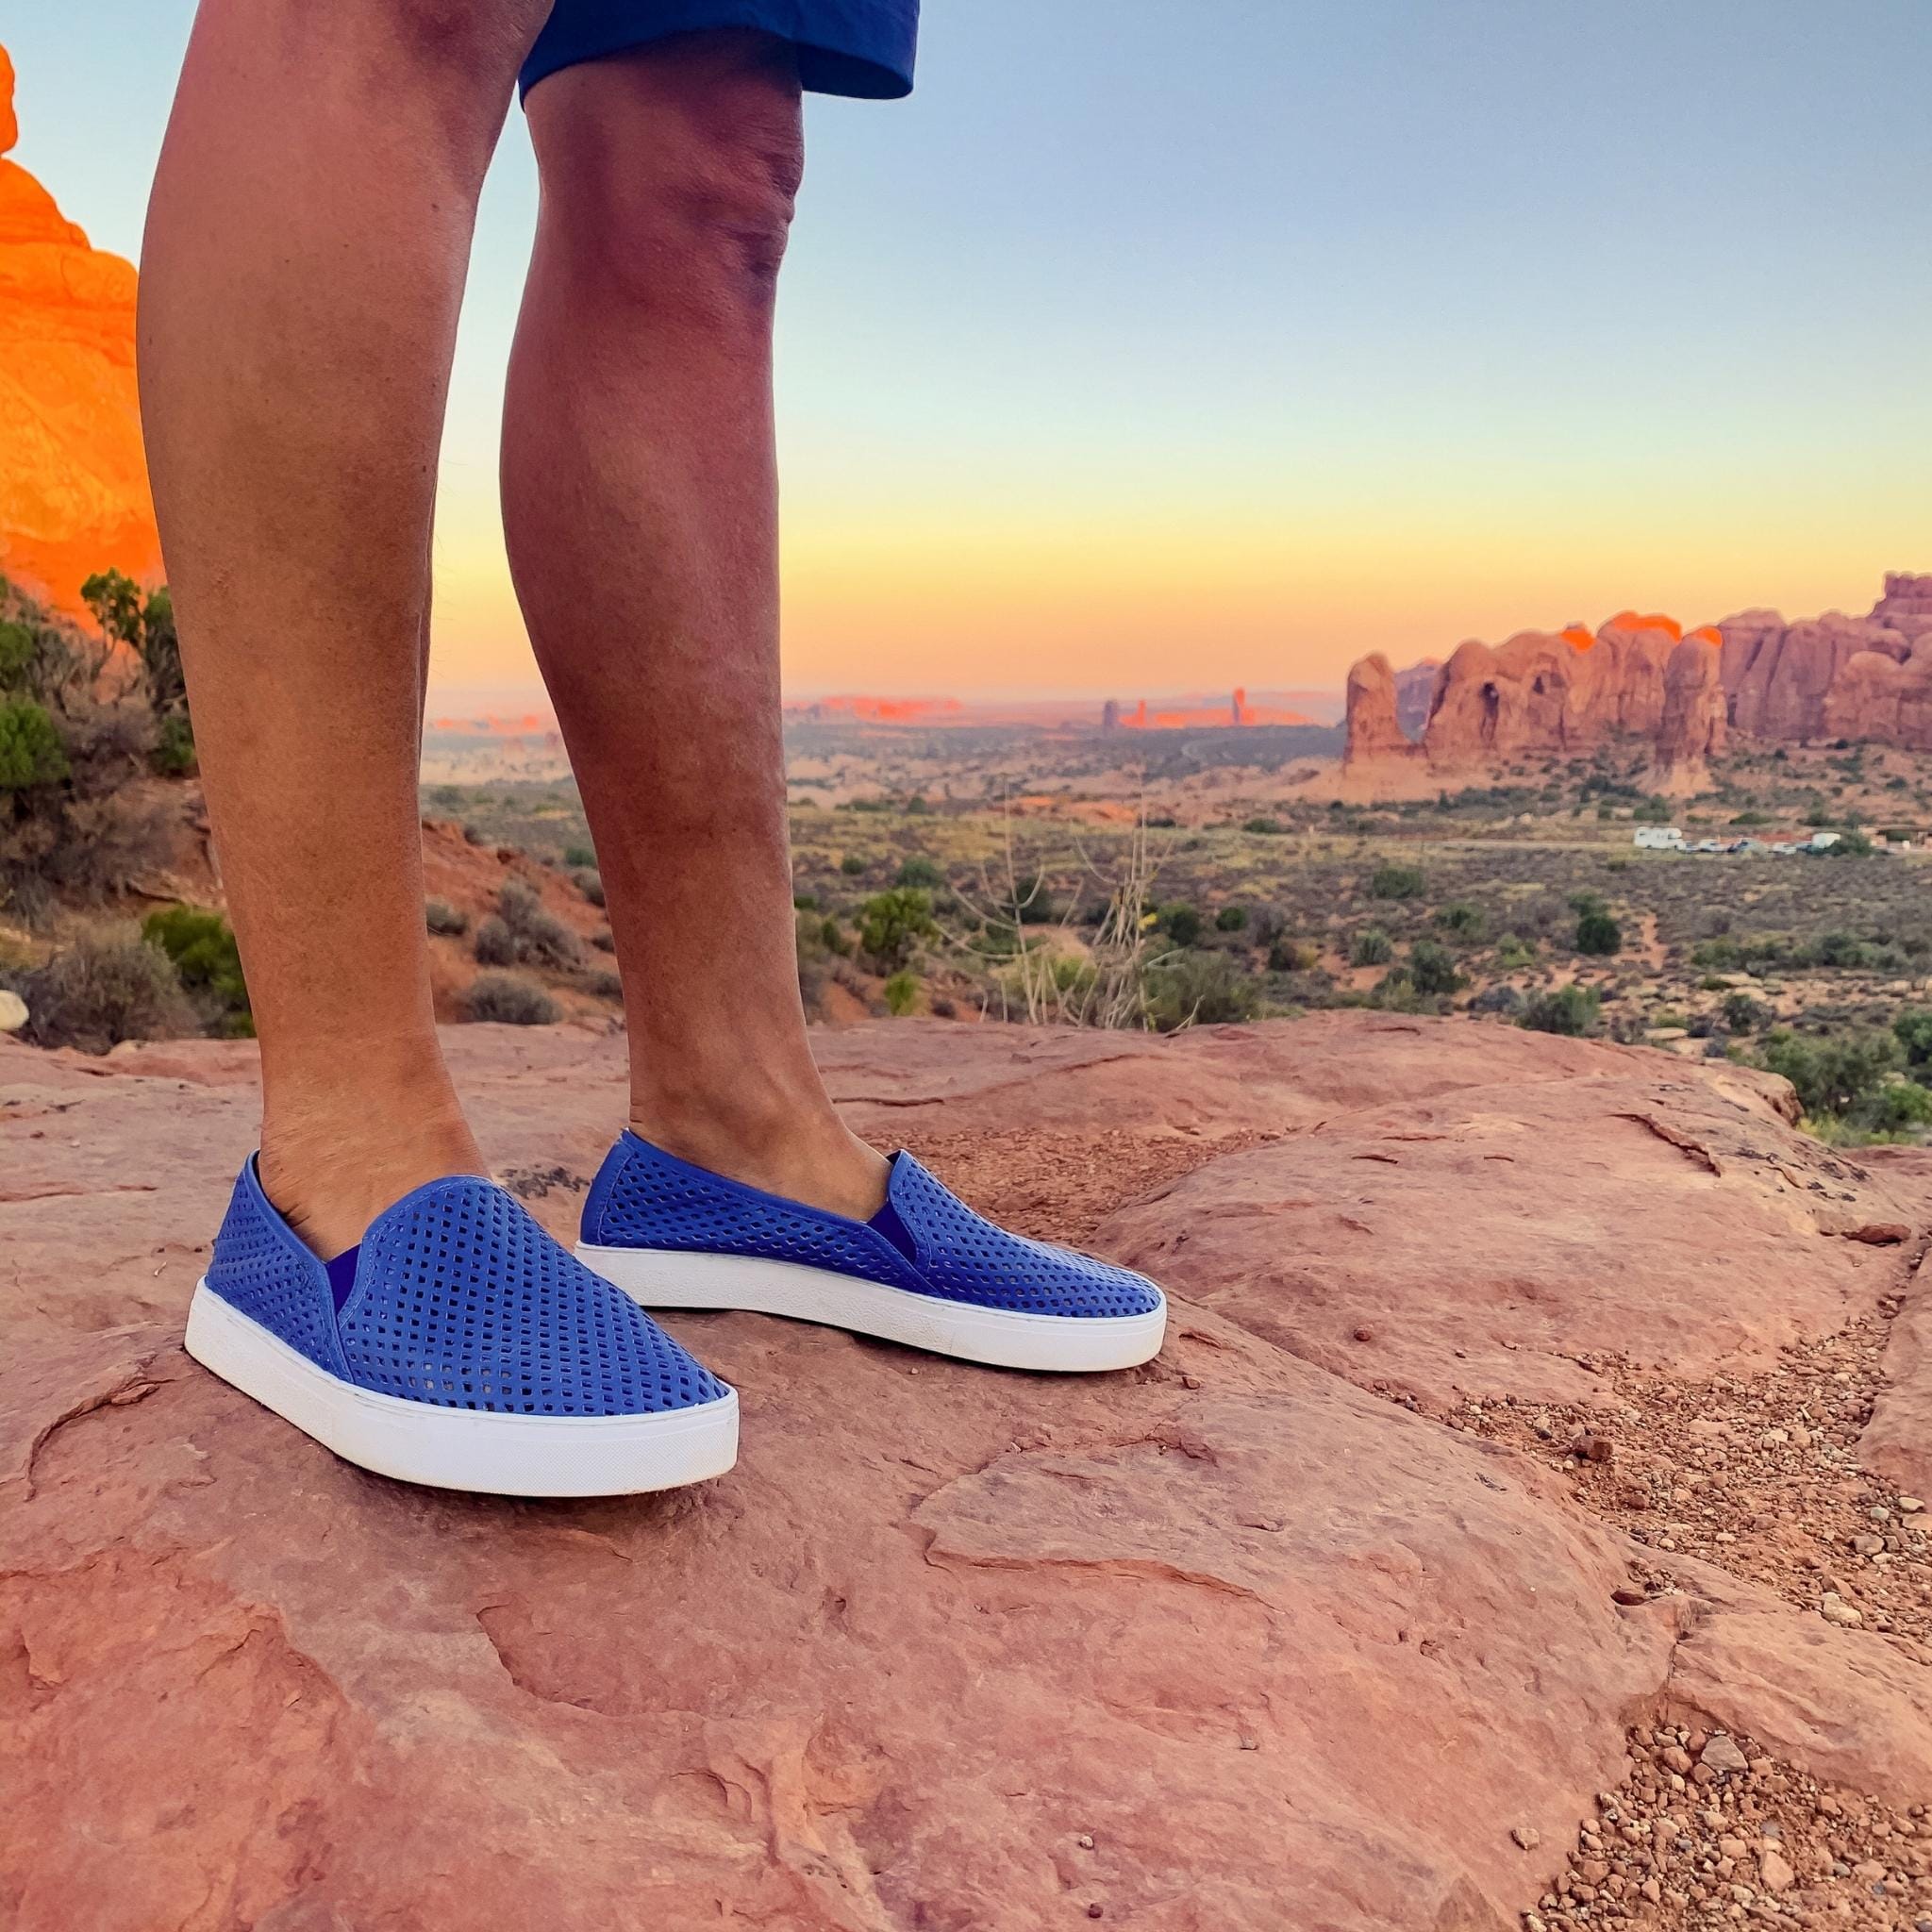 Jibs_Classics Galaxy Blue leather slip-on sneaker shoes sustainable Editorial Travel